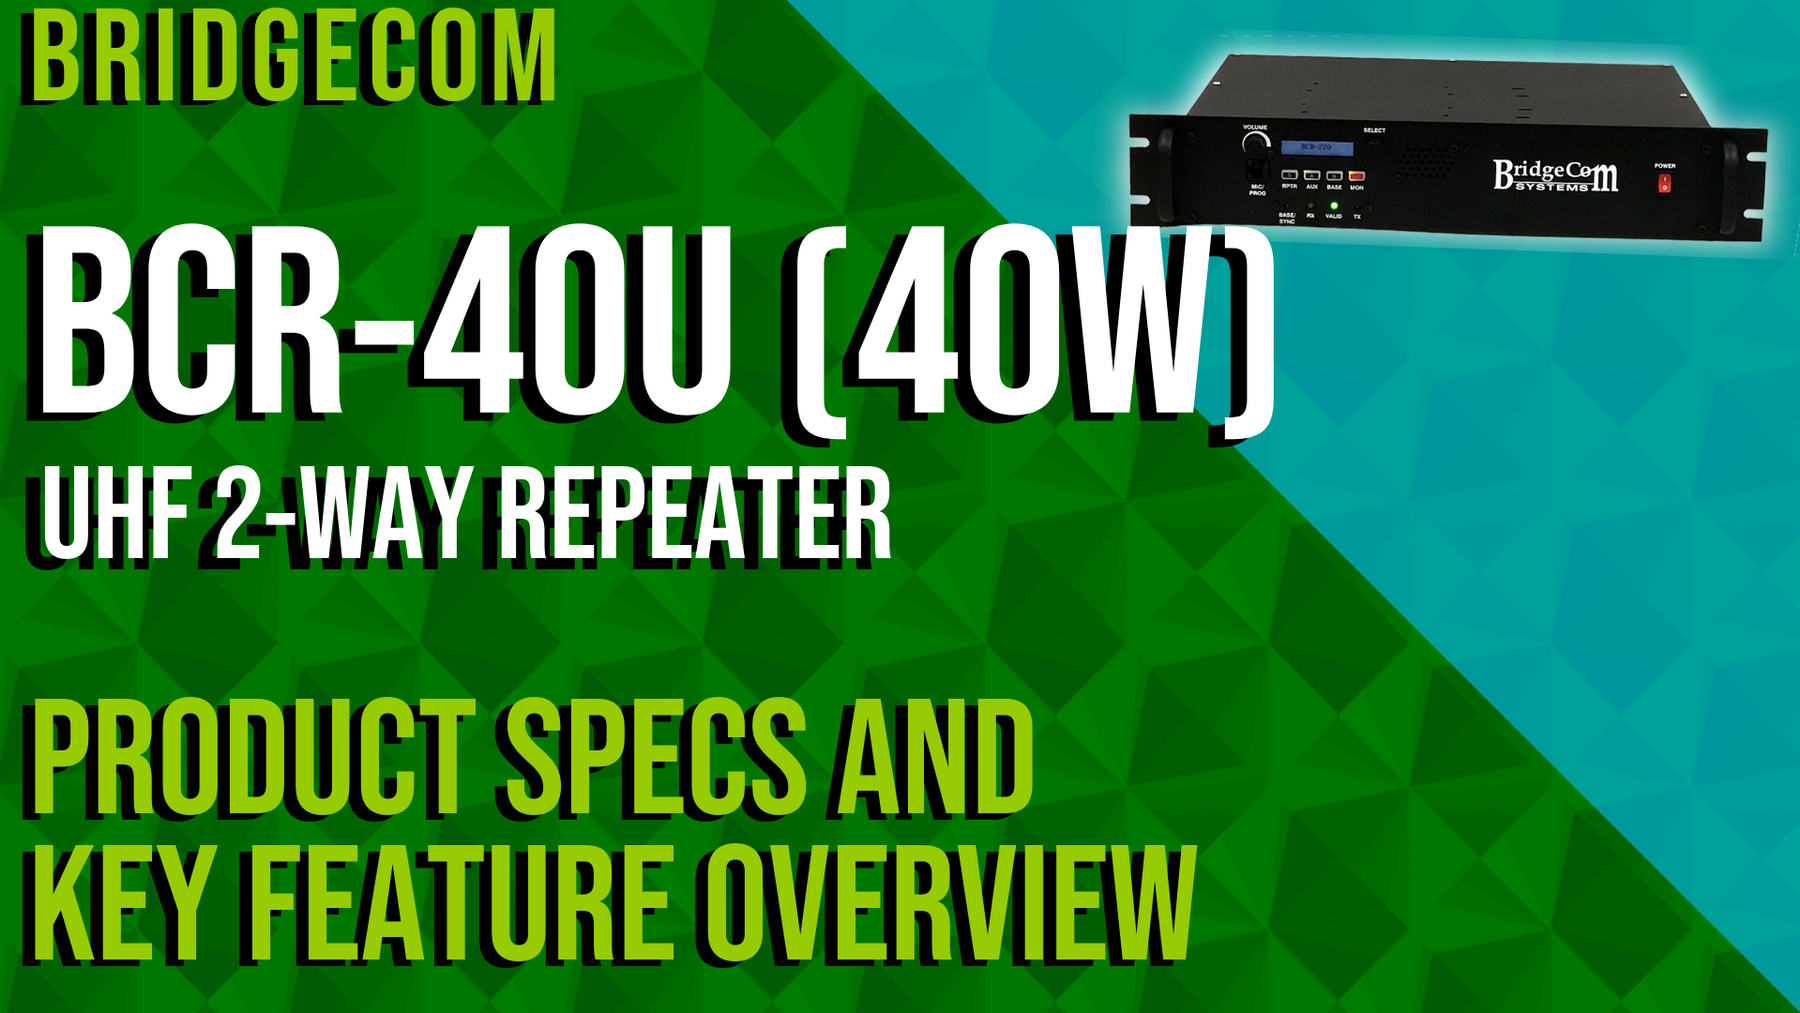 BridgeCom BCR-40U UHF (40W) 2-Way Repeater Product Specs and Key Feature Overview